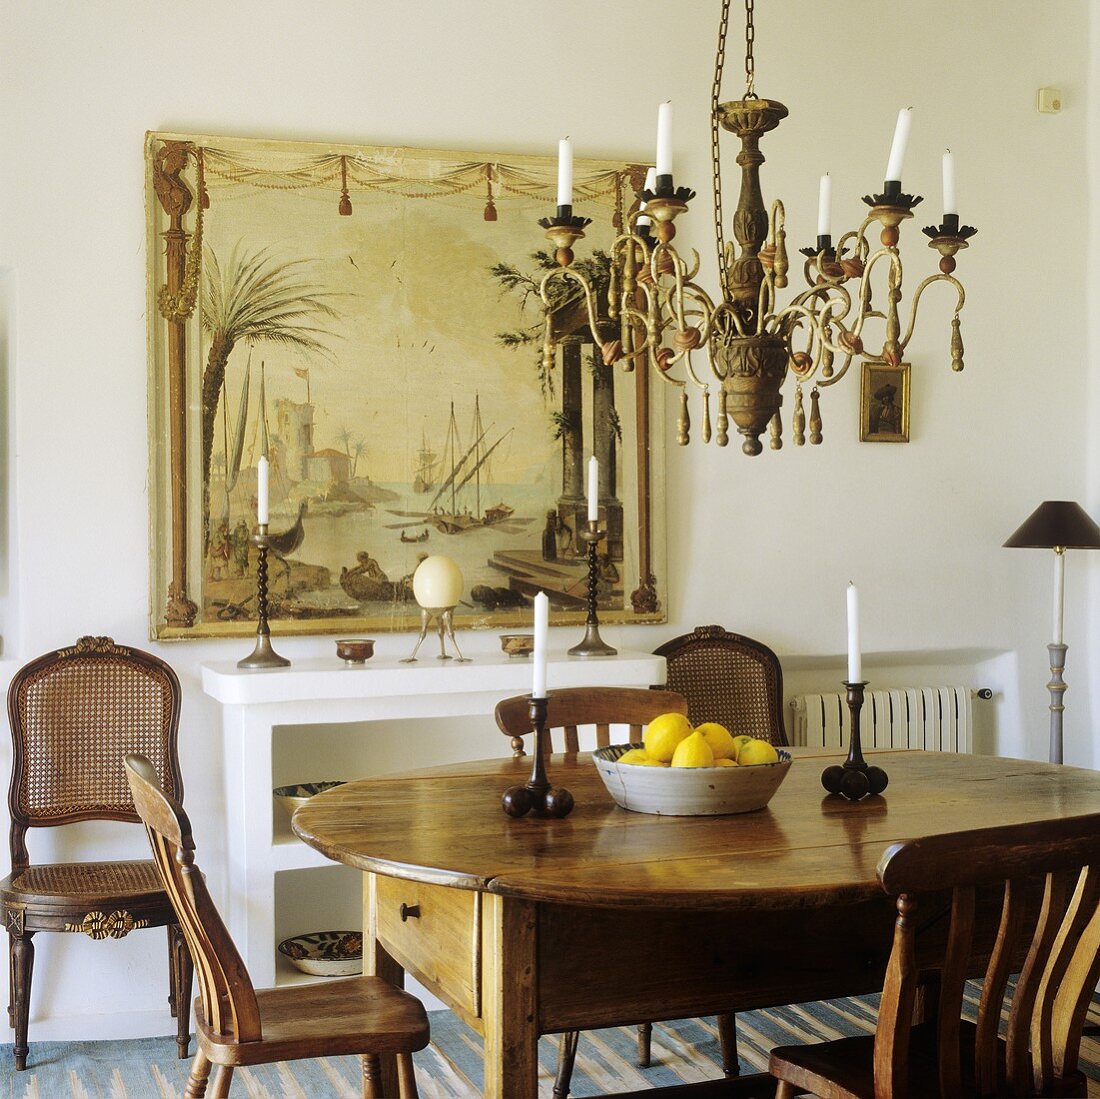 A chandelier above a fruit bowl on country house-style dining table and chairs